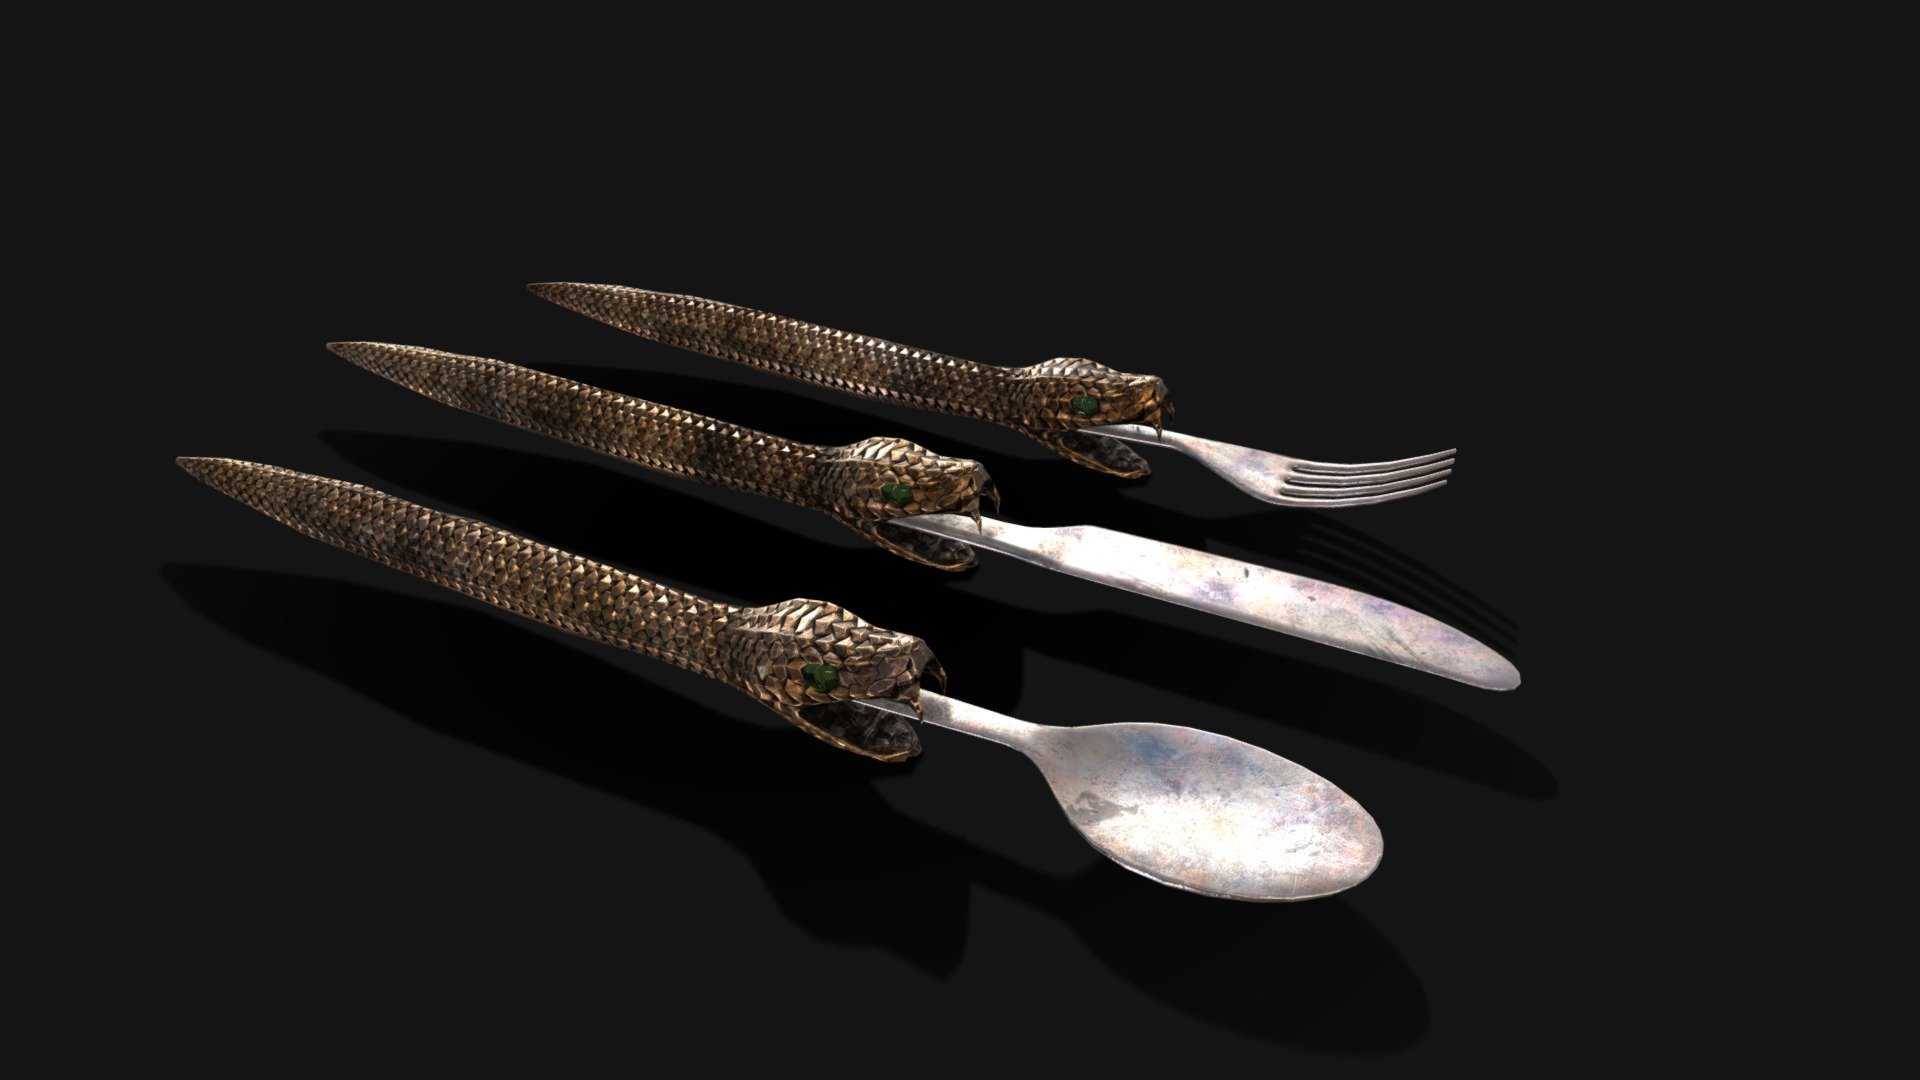 Snake King Cutlery 3D Model. This model contains the Snake King Cutlery itself 

All modeled in Maya, textured with Substance Painter.

The model was built to scale and is UV unwrapped properly. Contains only one 4K texture set.  

⦁   4062 tris. 

⦁   Contains: .FBX .OBJ and .DAE

⦁   Model has clean topology. No Ngons.

⦁   Built to scale

⦁   Unwrapped UV Map

⦁   4K Texture set

⦁   High quality details

⦁   Based on real life references

⦁   Renders done in Marmoset Toolbag

Polycount: 

verts 2065

edges 4114

faces 2058

tris 4062

If you have any questions please feel free to ask me 3d model